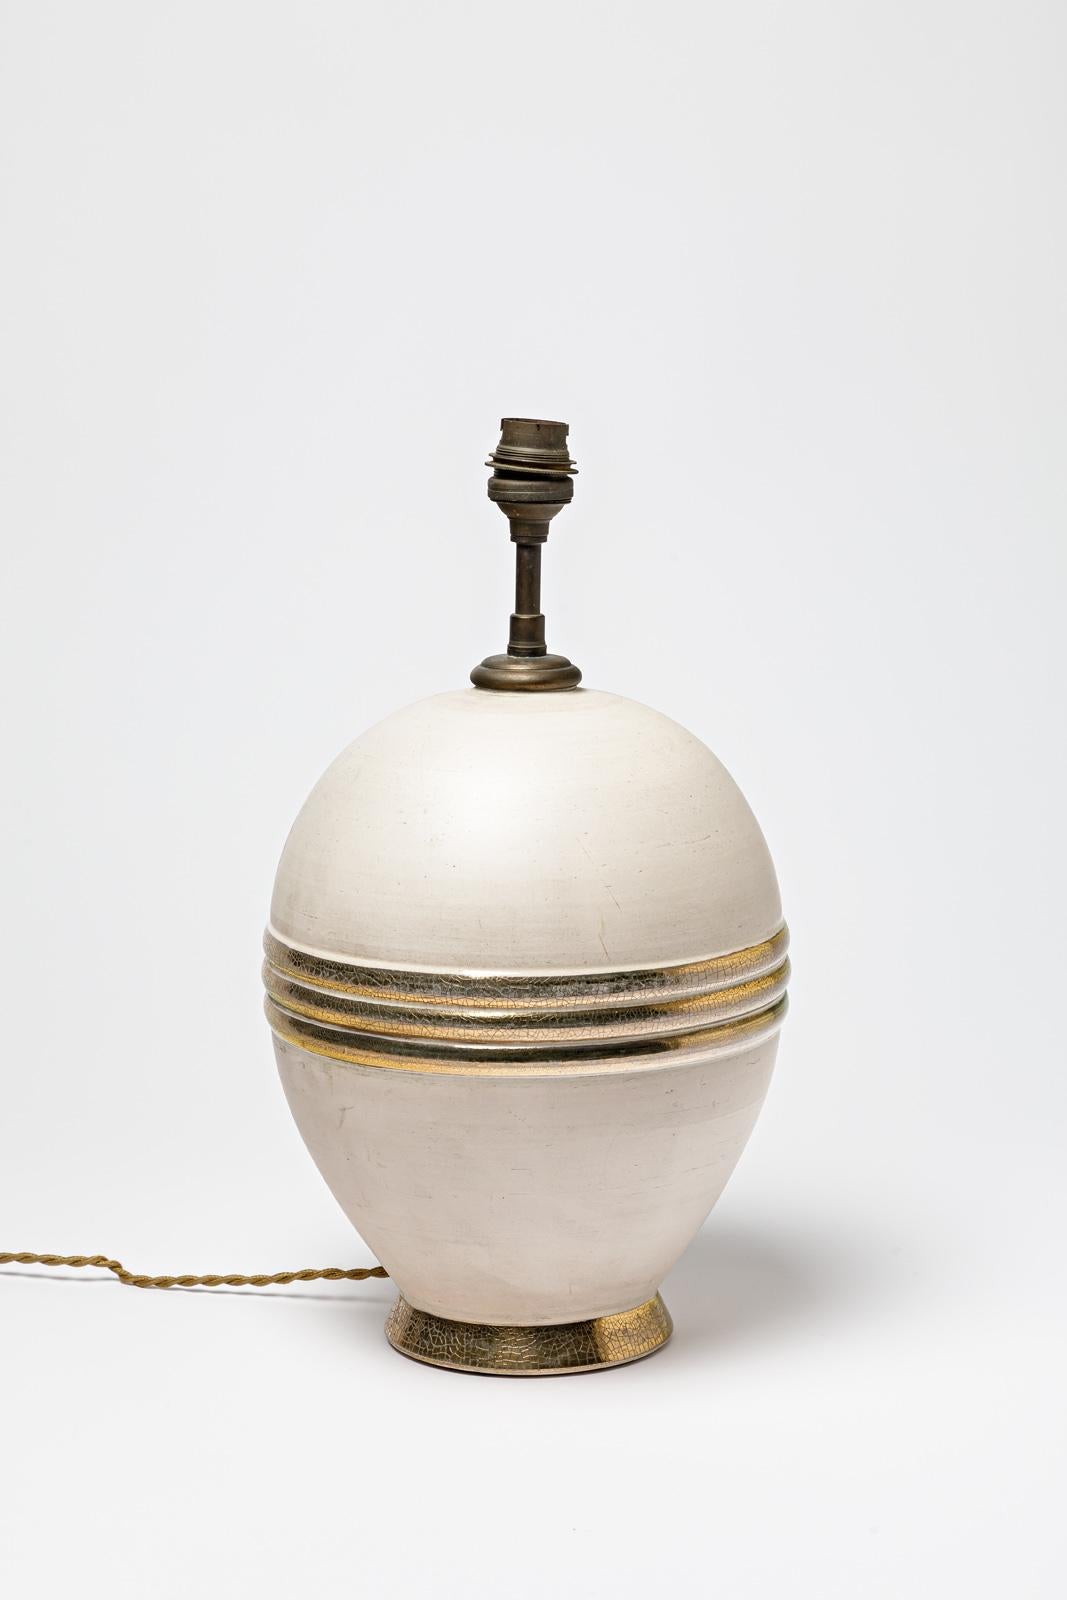 Beige and gold / Silver glazed ceramic table lamp.
Circa 1920-1930.
H : 9.8’ x 7.1’ inches (ceramic only).
Sold with a European electrical system.